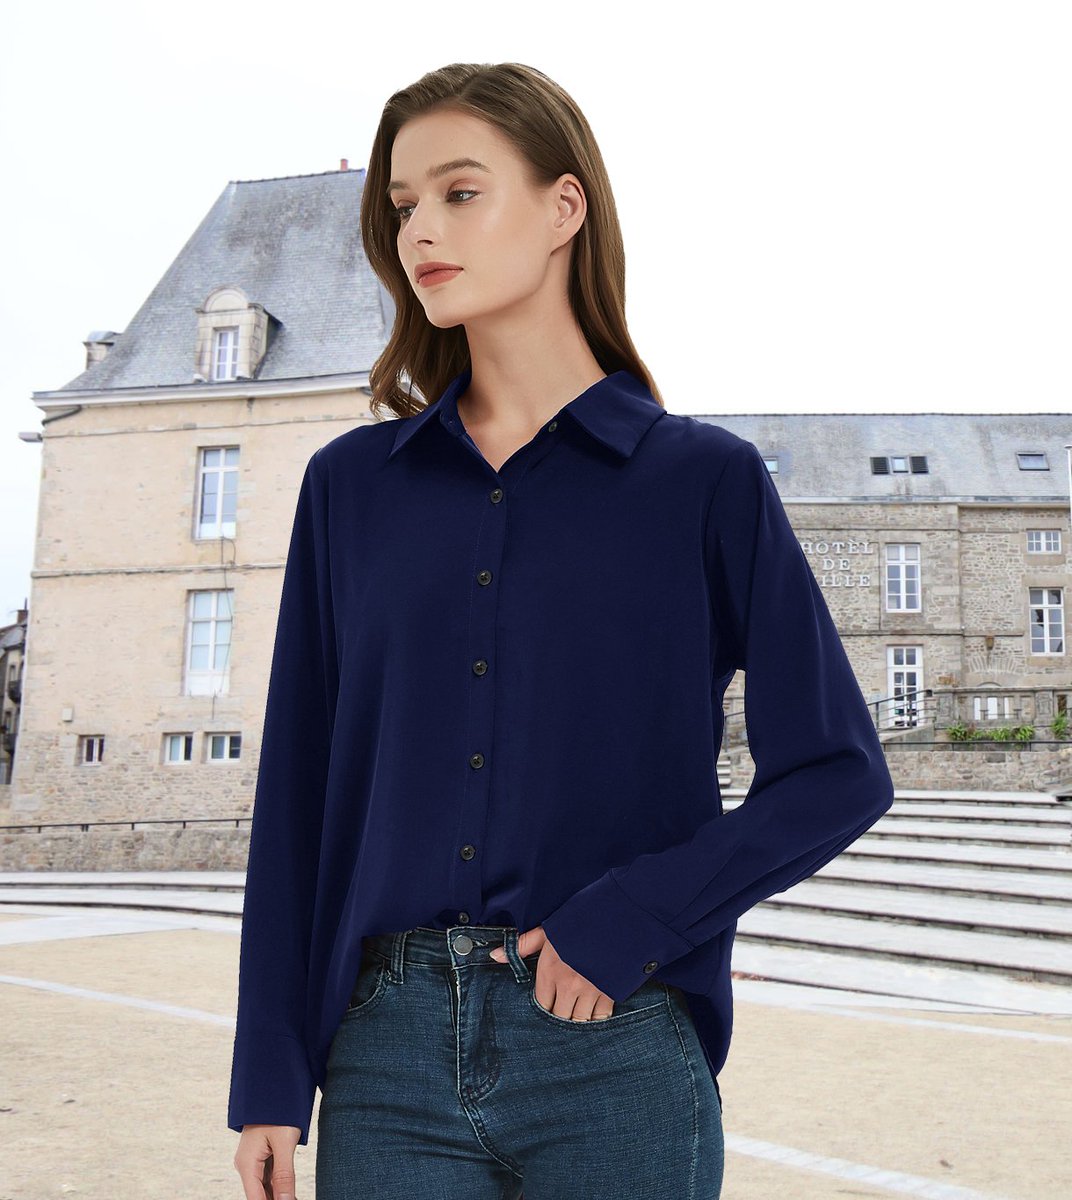 YAMANMAN button down shirt is made of high-quality fabric, which is soft and comfortable, with good breathability, allowing your skin to feel comfort and freedom when wearing. 
#AmazonPrime #shirt #womenfashion